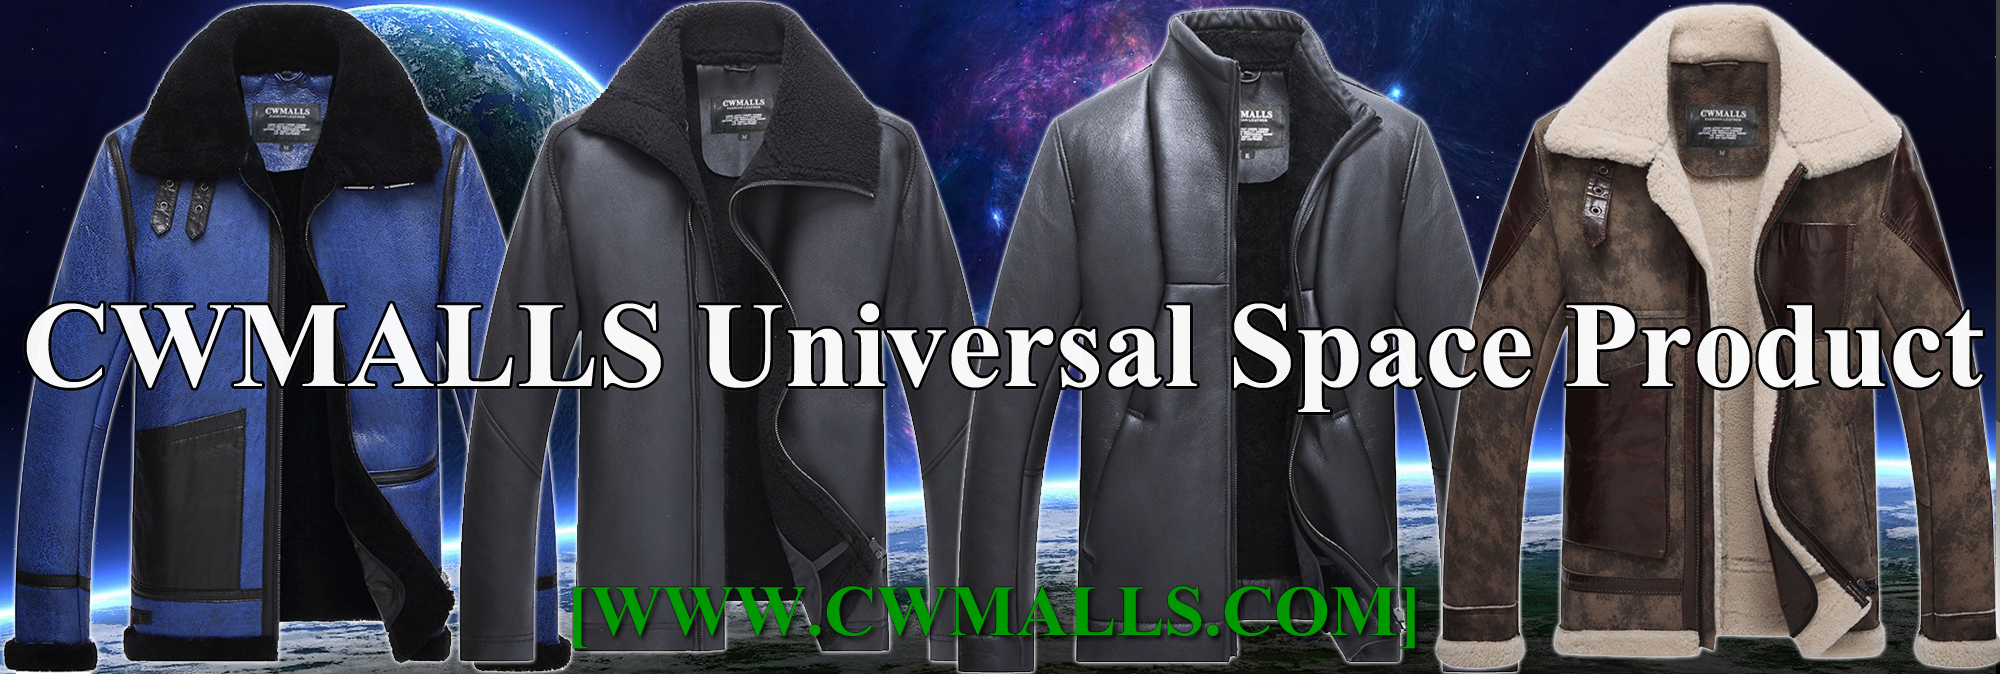 CWMALLS Universal Space Product- the United States Station Products